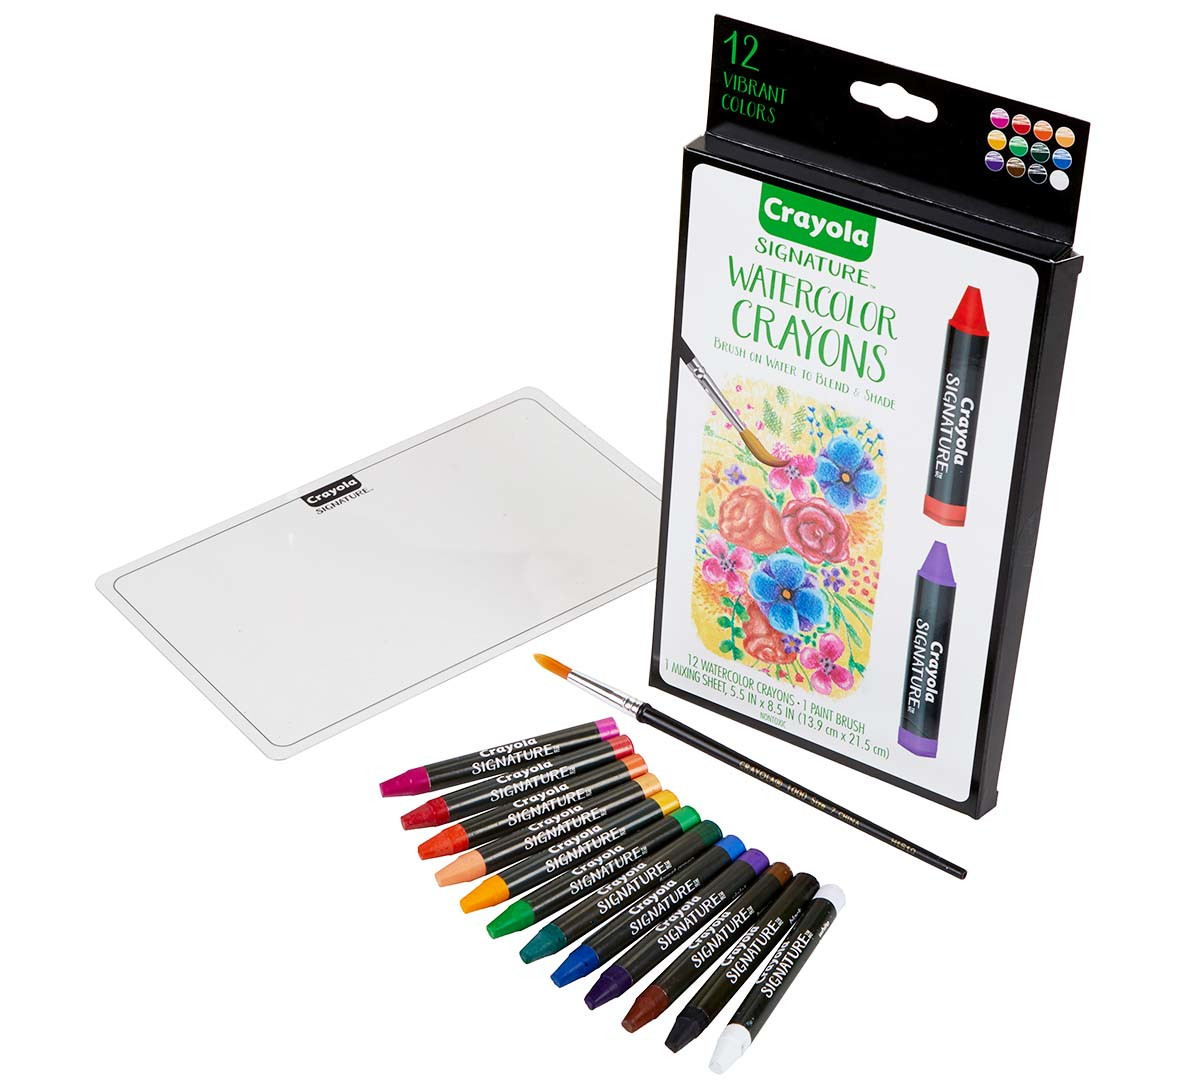 My Drawing Pad: Large Art Paper 8.5 x 11 for Drawing and Sketching with  Crayons and Markers for Toddlers, Preschoolers and Kids Ages 1, 2, 3, 4, 5,  6, 7, 8 Years